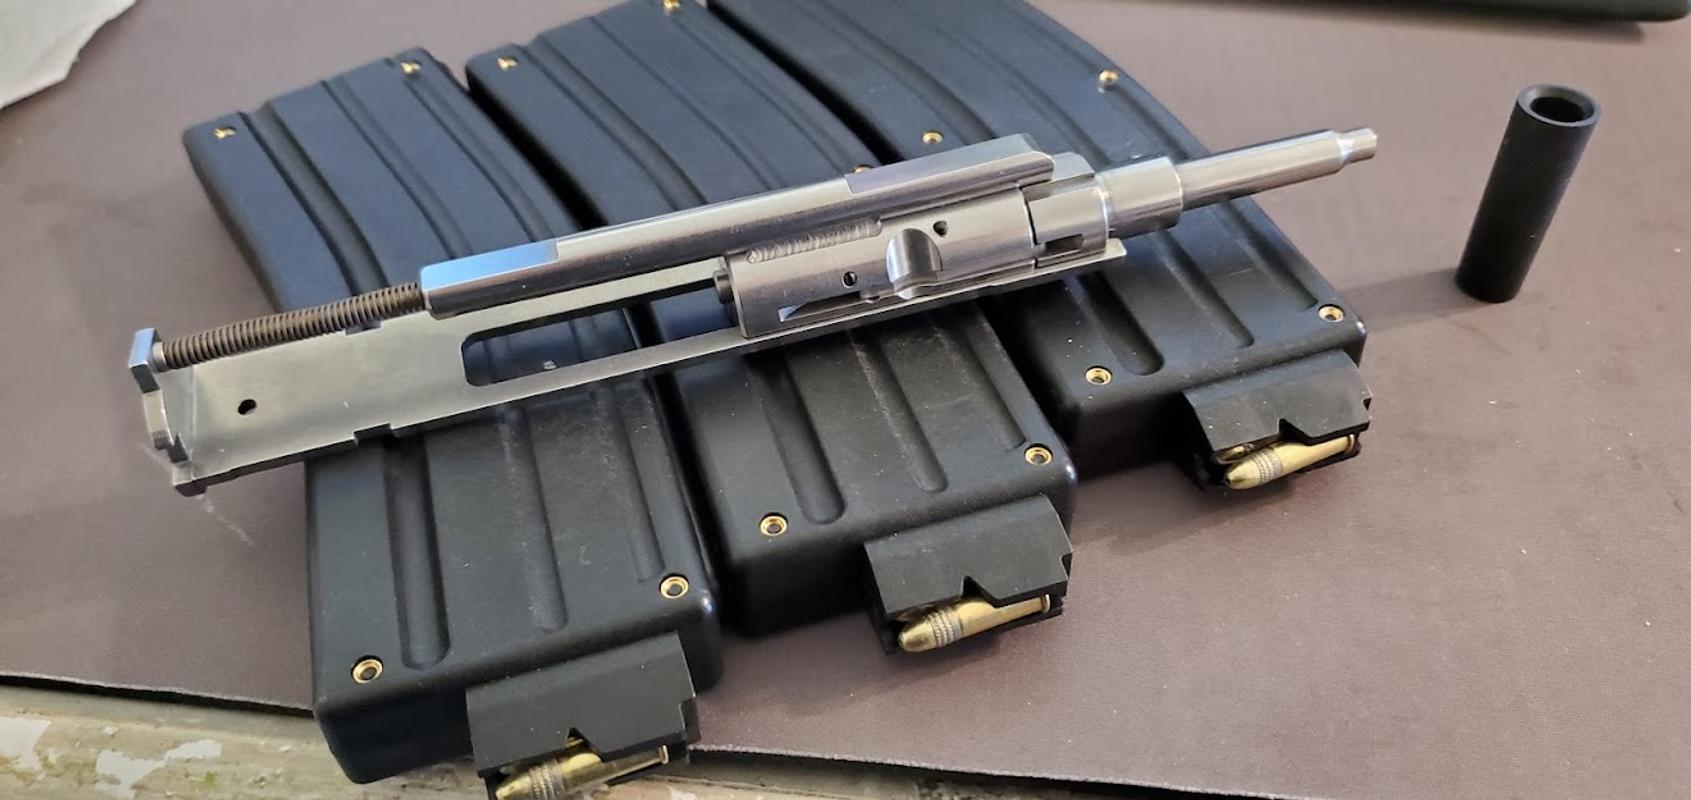 Wolf Army Military - Ar15 22Lr Conversion Kit Review - The BCG is fully ...